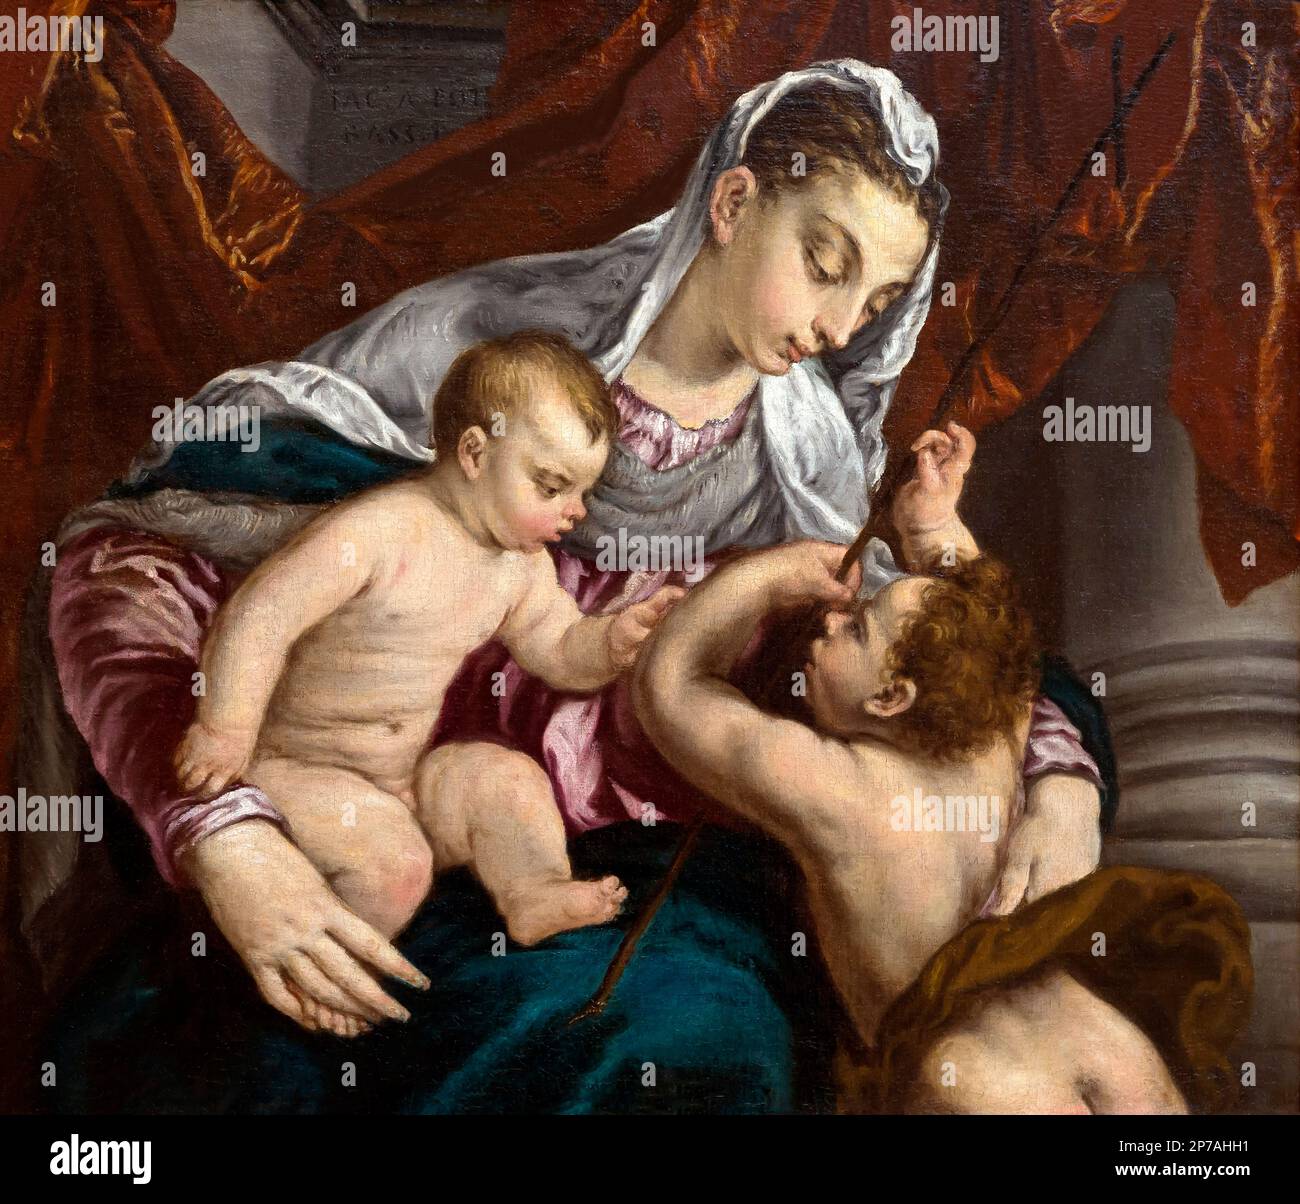 Virgin and Child with the Young Saint John the Baptist, Jacopo Bassano, circa 1560, Art Institute of Chicago, Chicago, Illinois, USA, North America, Stock Photo